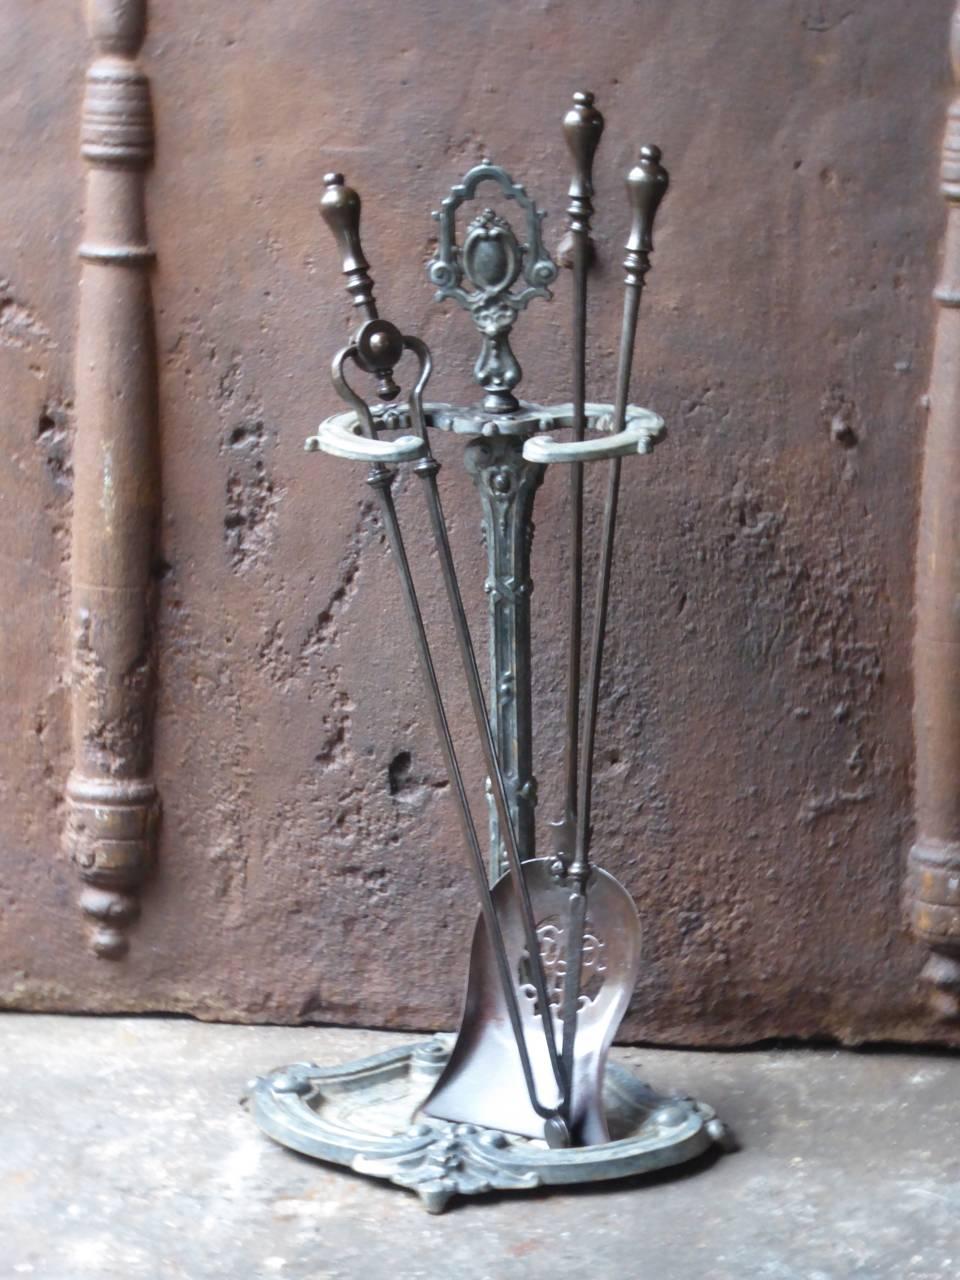 19th century English fireplace tool set or fire irons made of cast iron and wrought iron.

We have a unique and specialized collection of antique and used fireplace accessories consisting of more than 1000 listings at 1stdibs. Amongst others, we